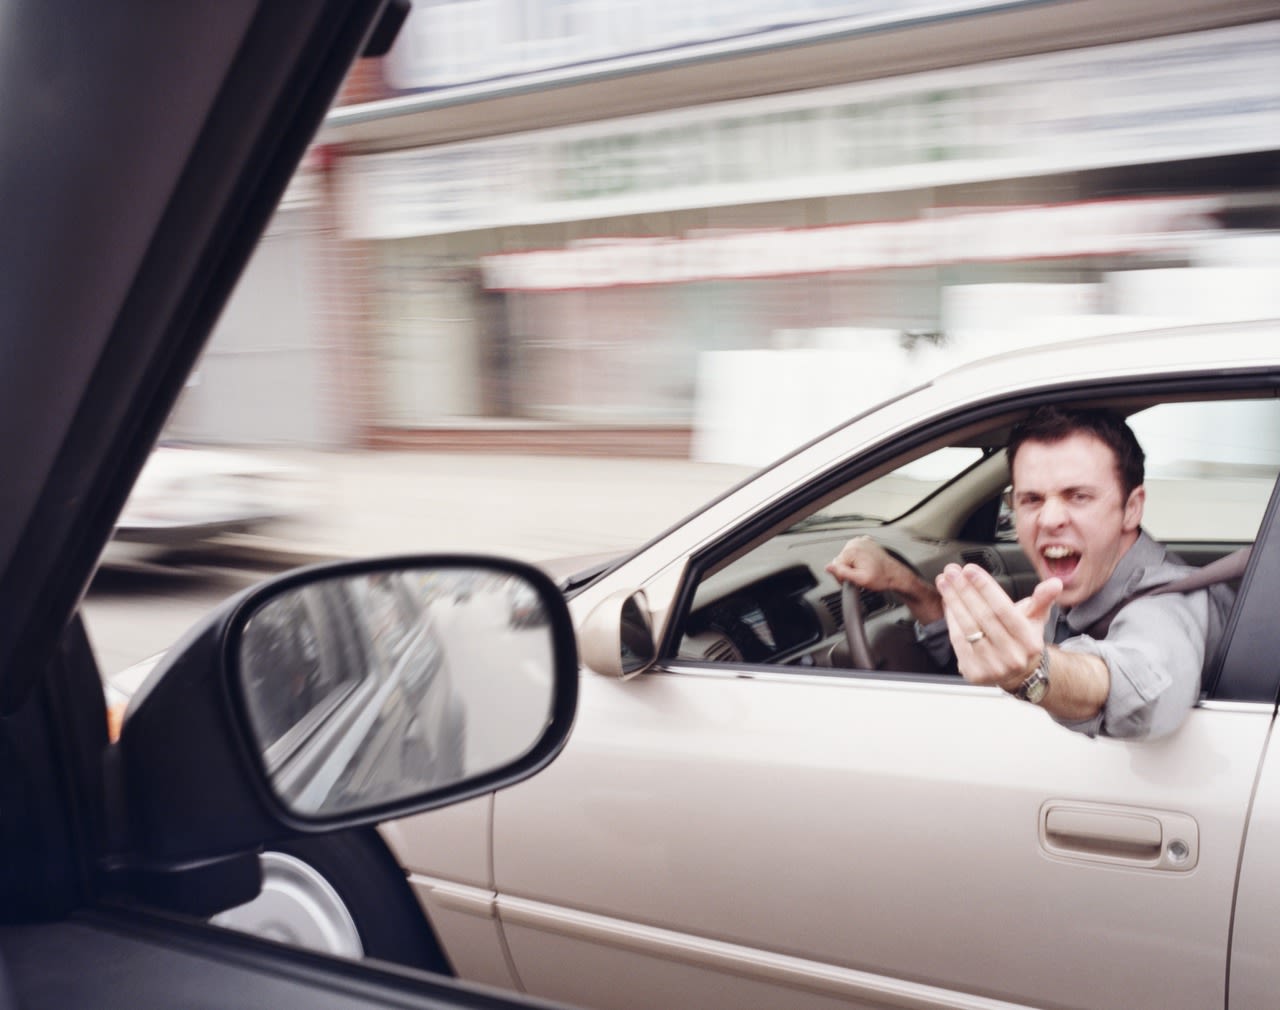 Road rage is soaring across U.S.: How bad is confrontational driving in N.Y.?